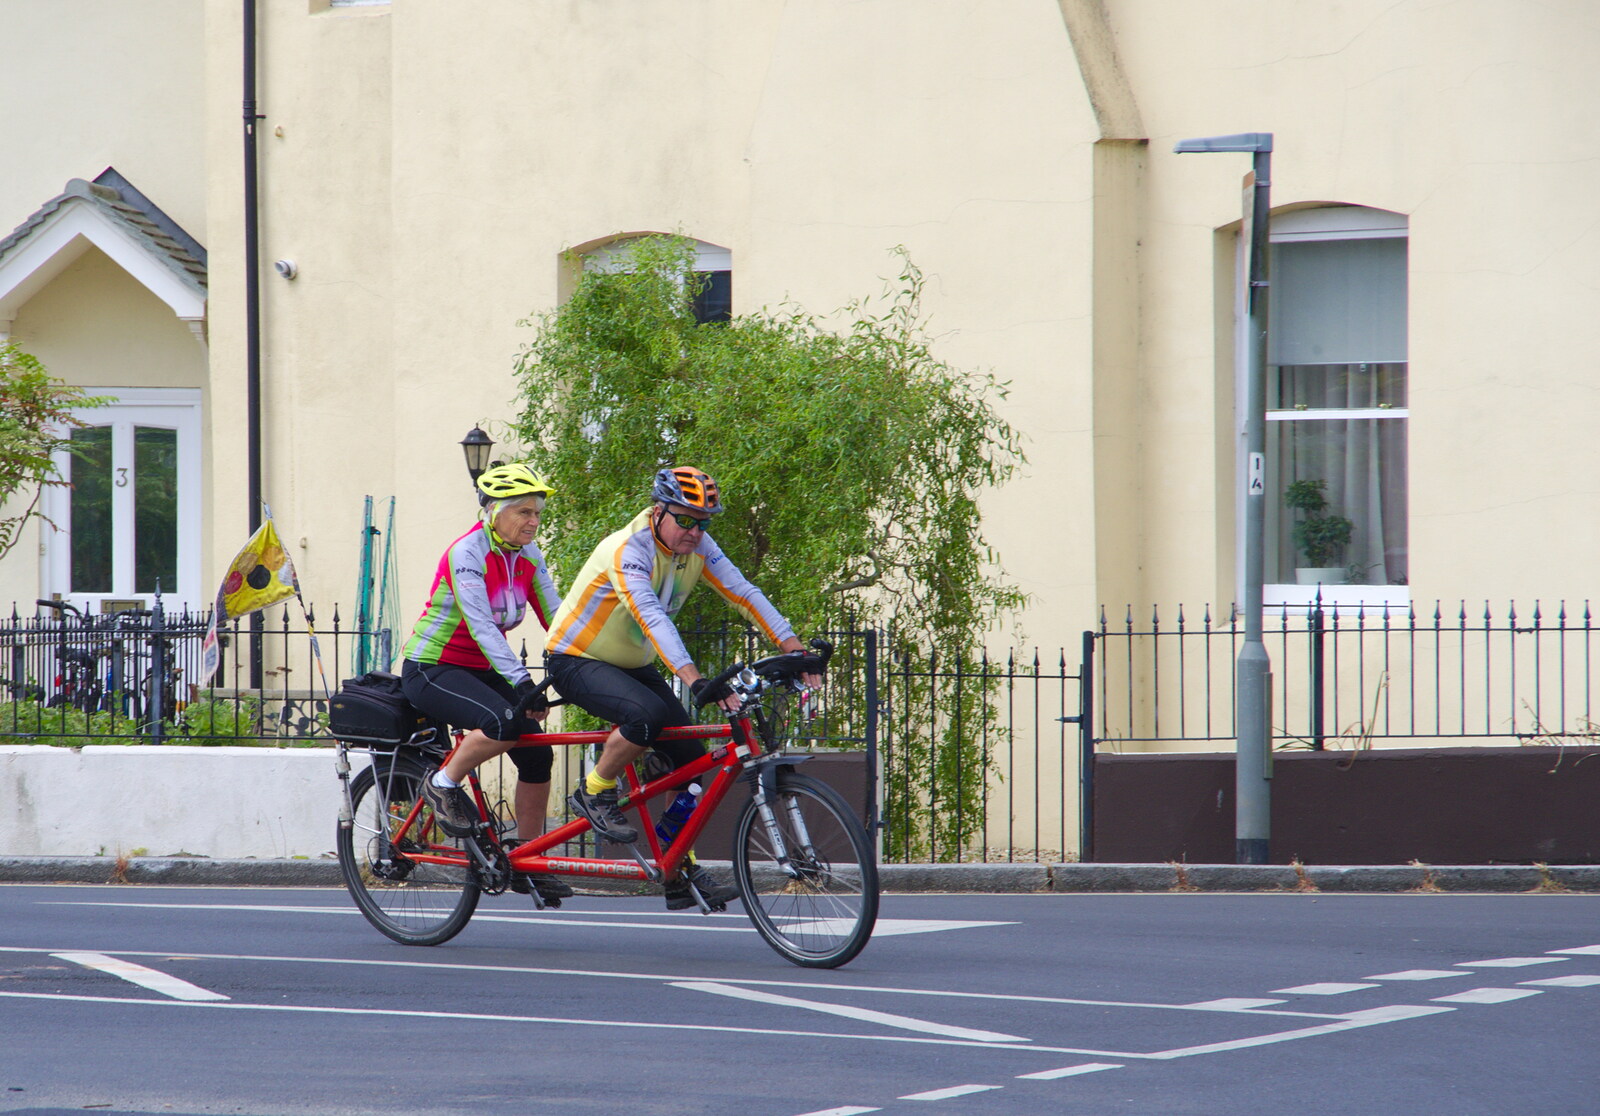 A tandem bike cycles past from The Tom Cobley and a Return to Haytor, Bovey Tracey, Devon - 27th May 2019